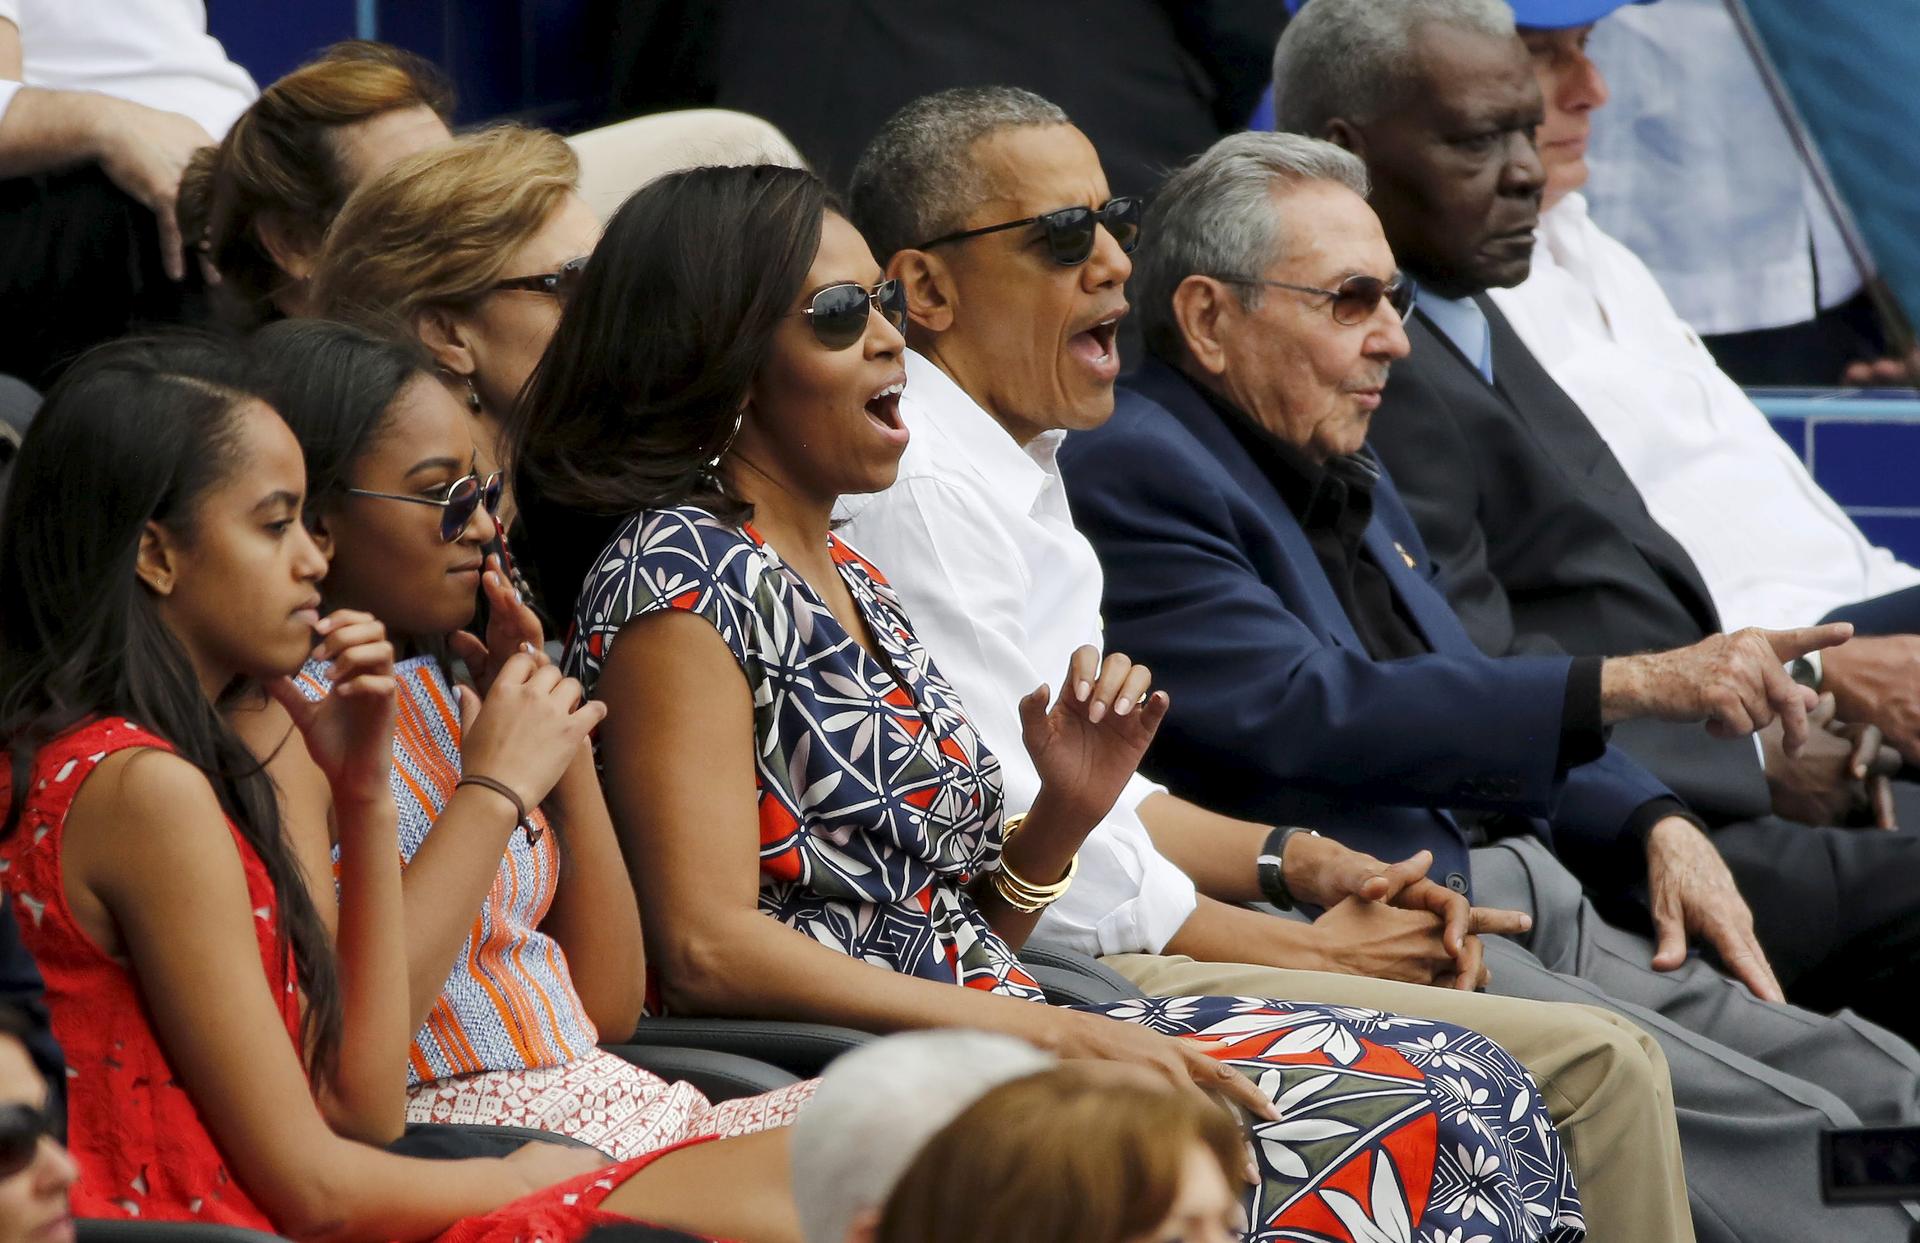 President Barack Obama and his family with Cuban President Raul Castro at an exhibition baseball game between the Cuban National team and the MLB Tampa Bay Rays in Havana.